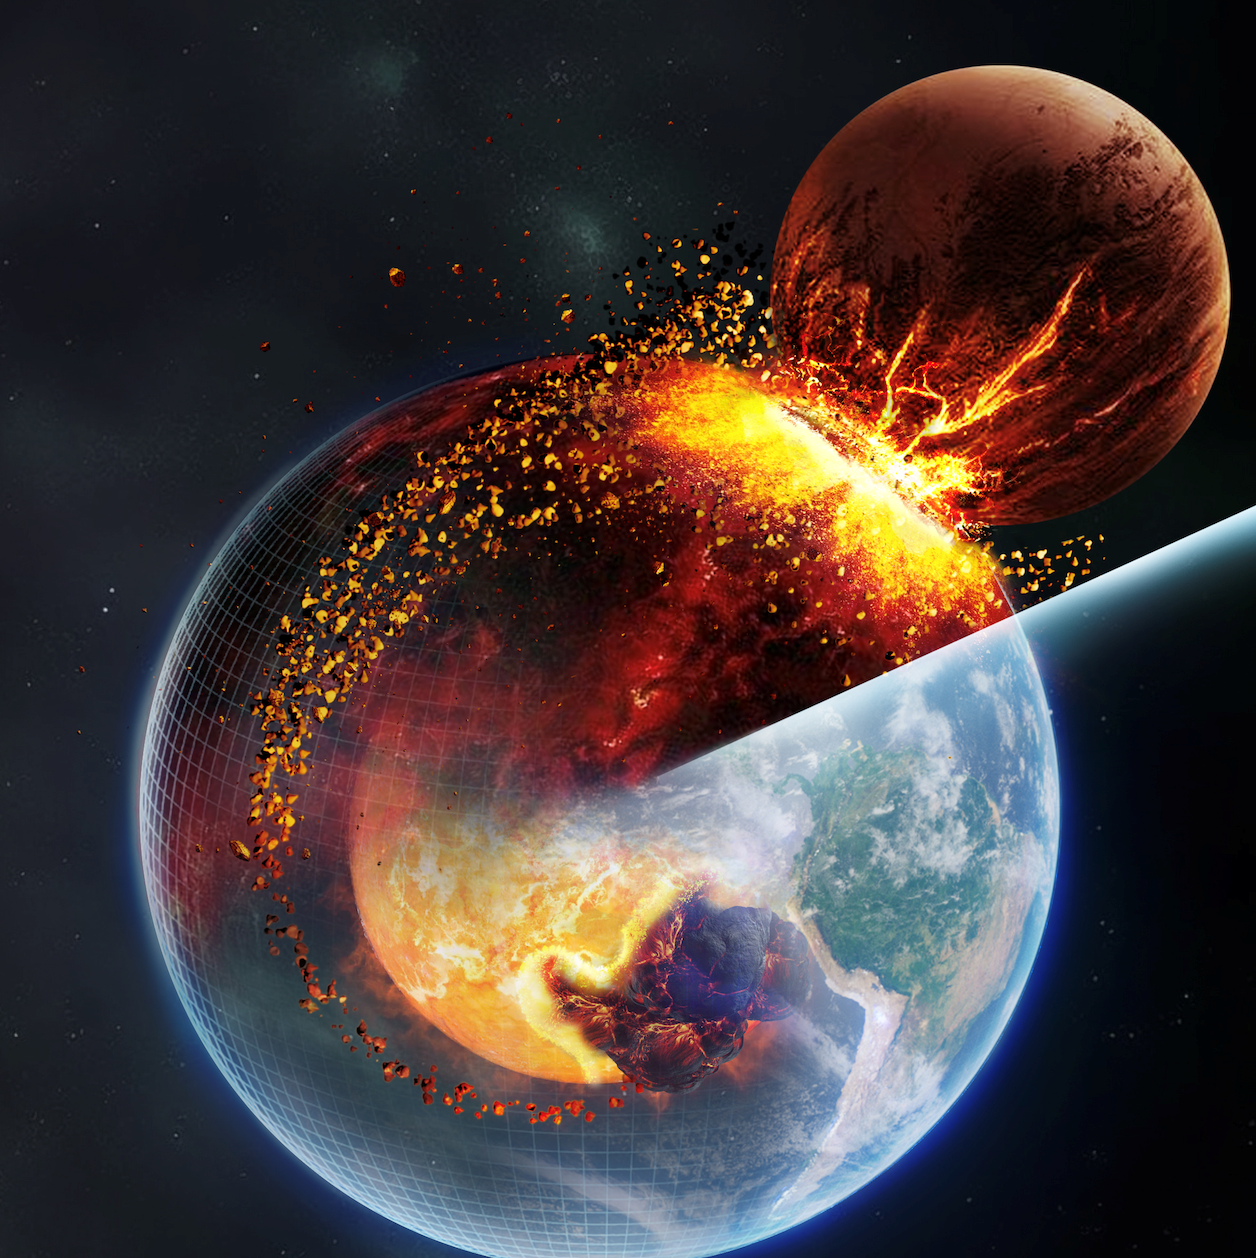 2% of Earth's Mass May Be Debris From the Massive Collision That Formed the Moon